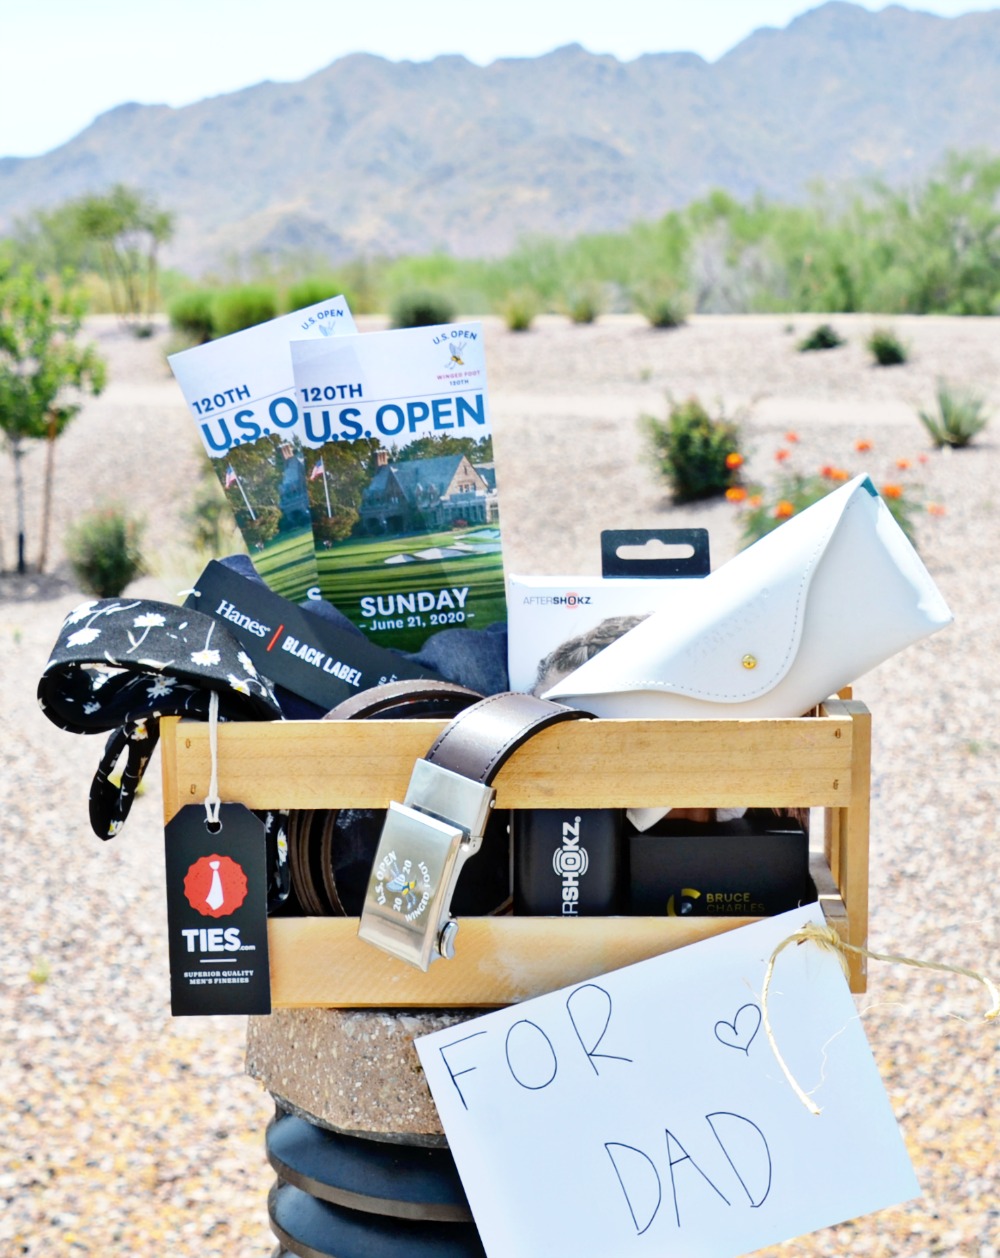 This gift crate has excellent Father's Day gift ideas for the active dad.